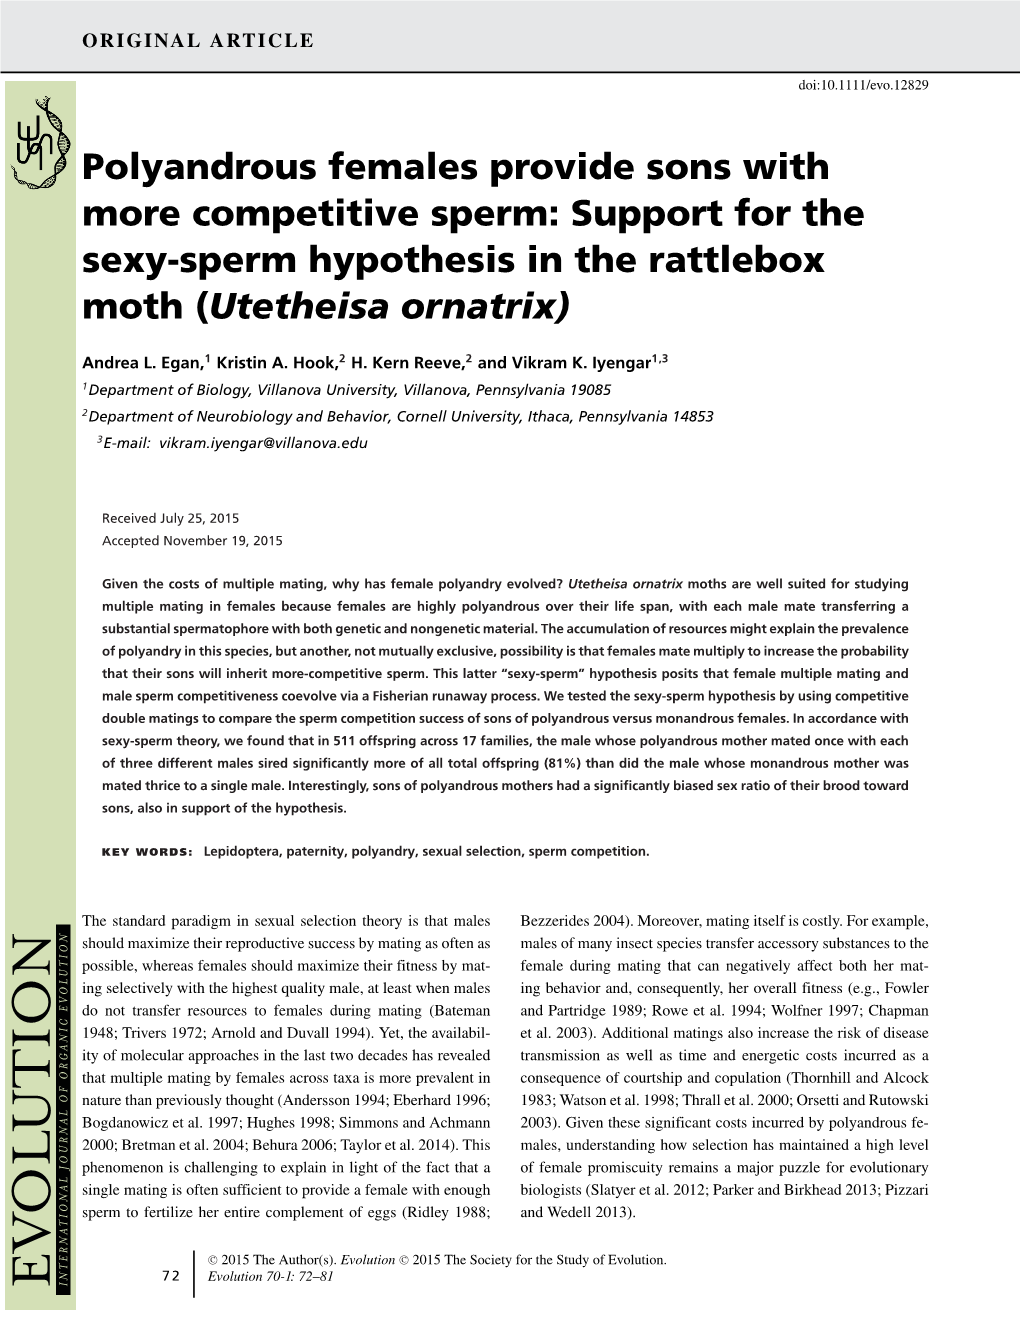 Polyandrous Females Provide Sons with More Competitive Sperm: Support for the Sexy-Sperm Hypothesis in the Rattlebox Moth (Utetheisa Ornatrix)